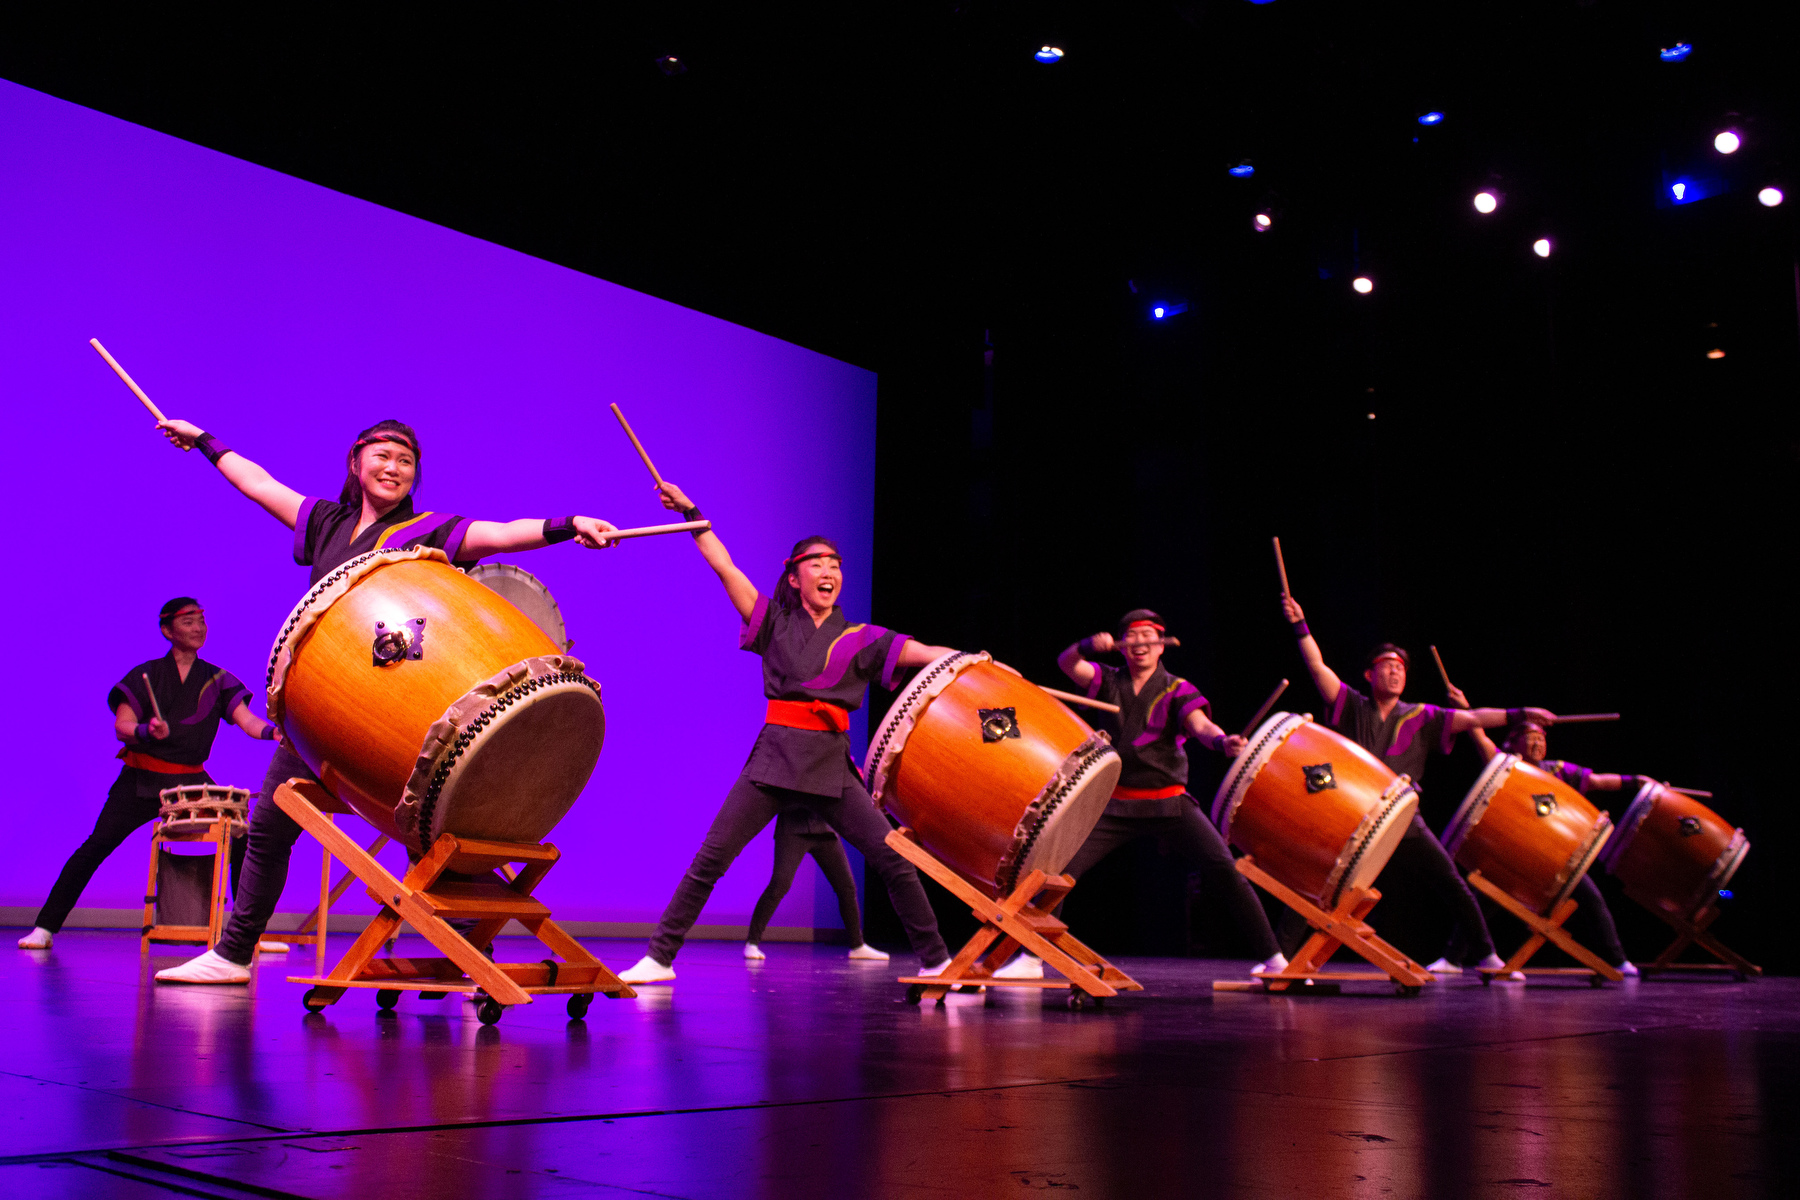 San Jose Taiko performed as part of the ARTSwego performing arts series on March 6 in Waterman Theatre. This image shows a line of drummers performing.